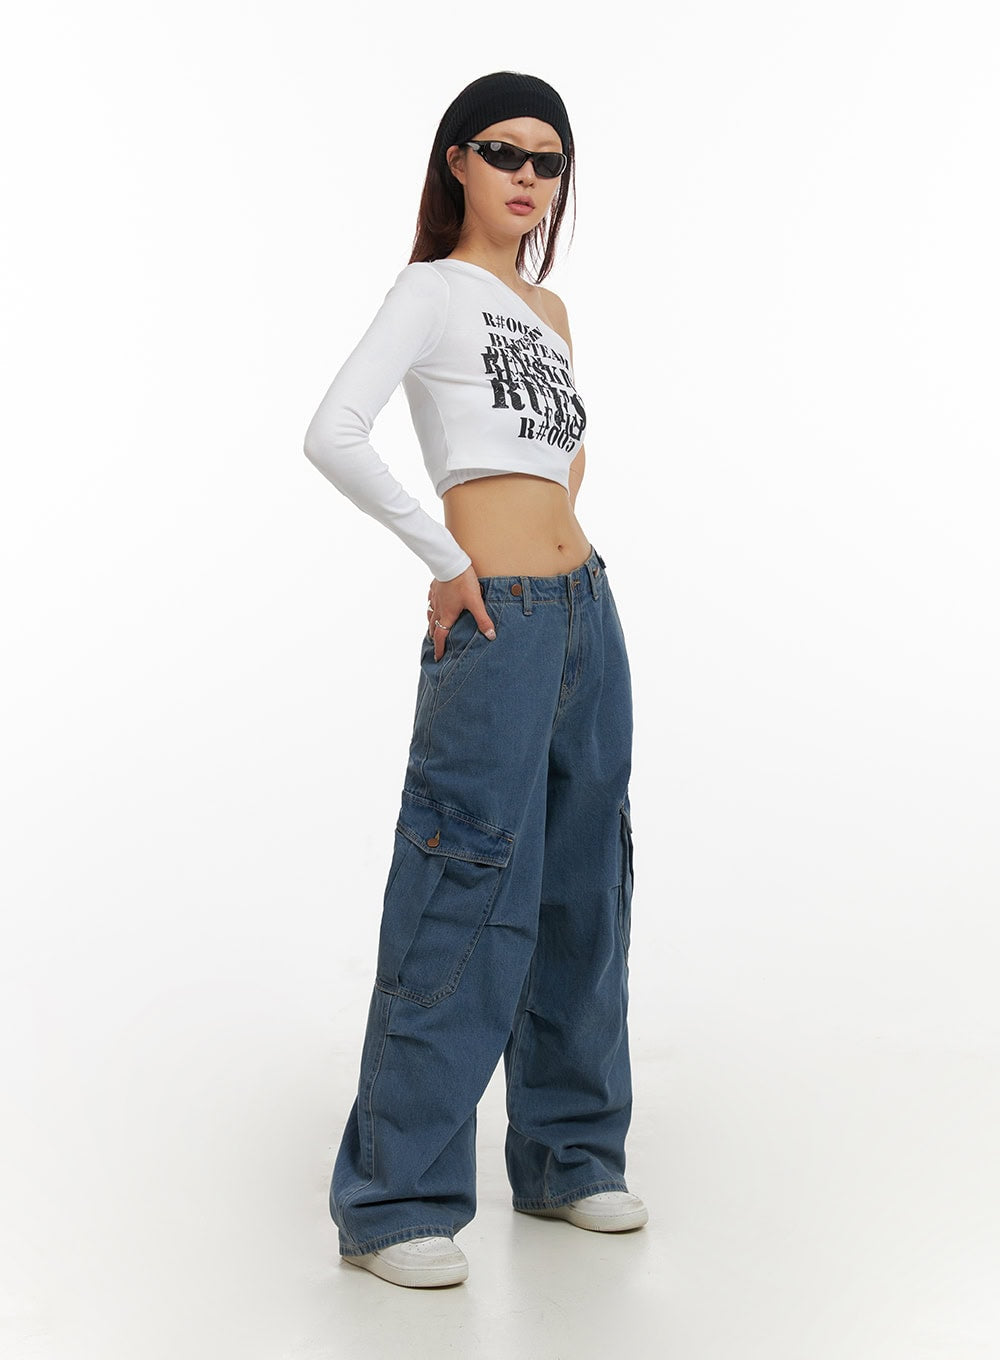 cargo-buttoned-jeans-iy410